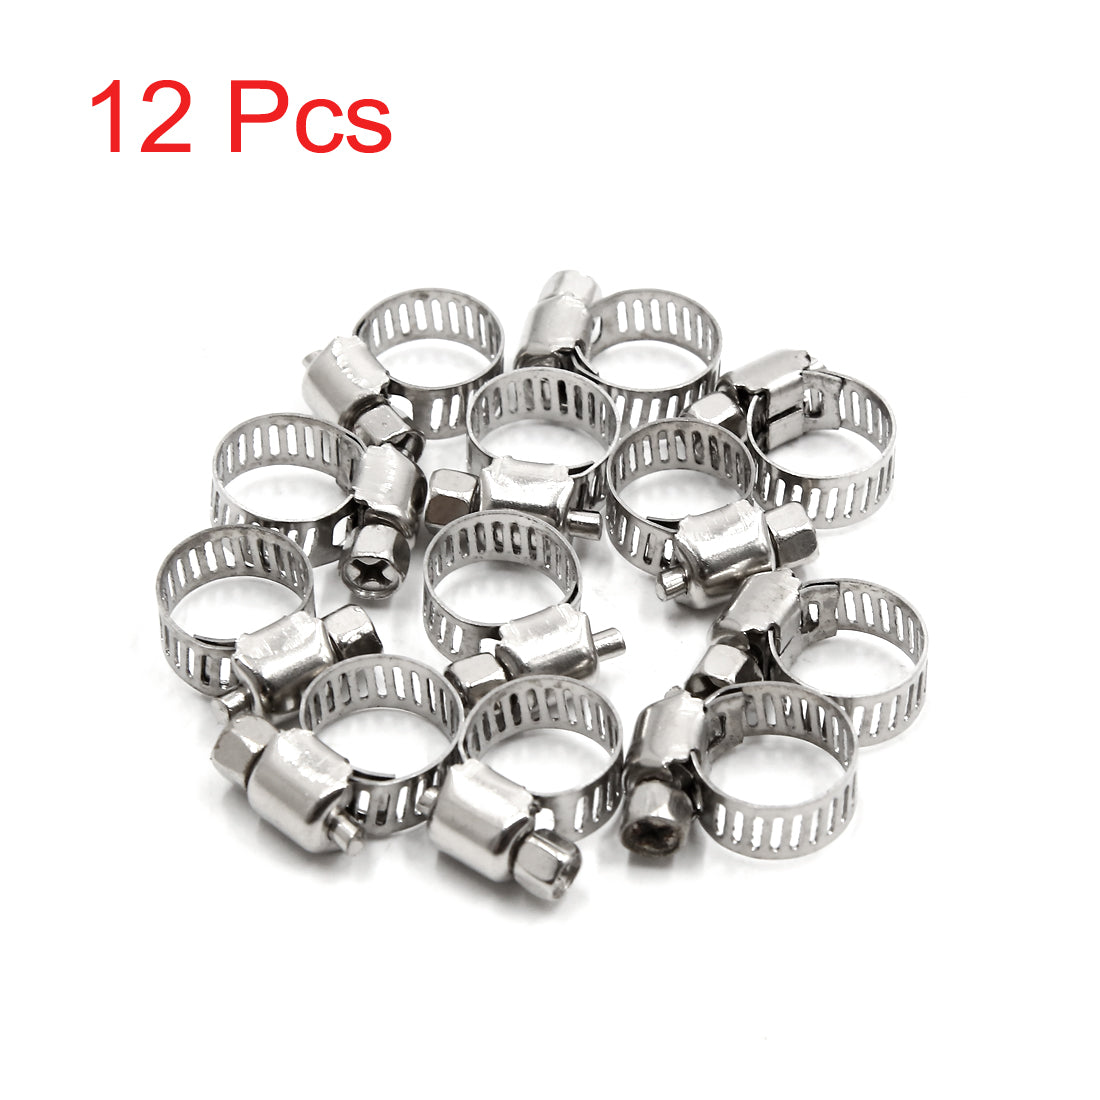 uxcell Uxcell 12Pcs Metal Adjustable Drive Hose Clamp Fuel Line  Clip 8-12mm for Car